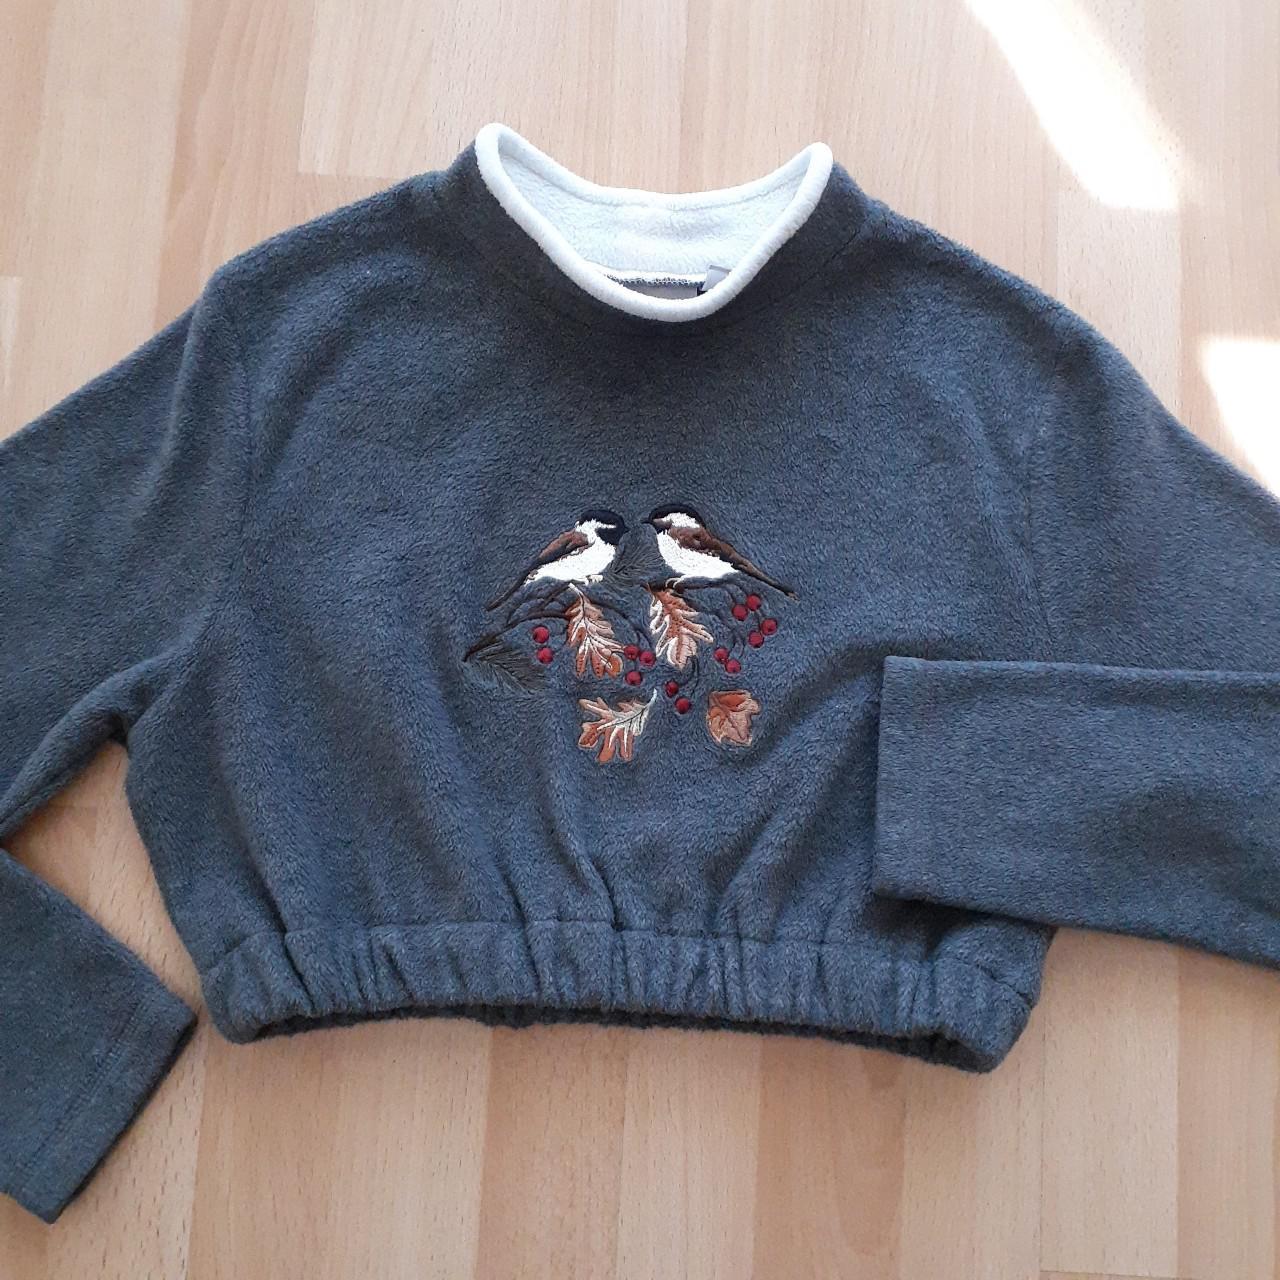 Product Image 2 - Adorable dark grey birds embroidered